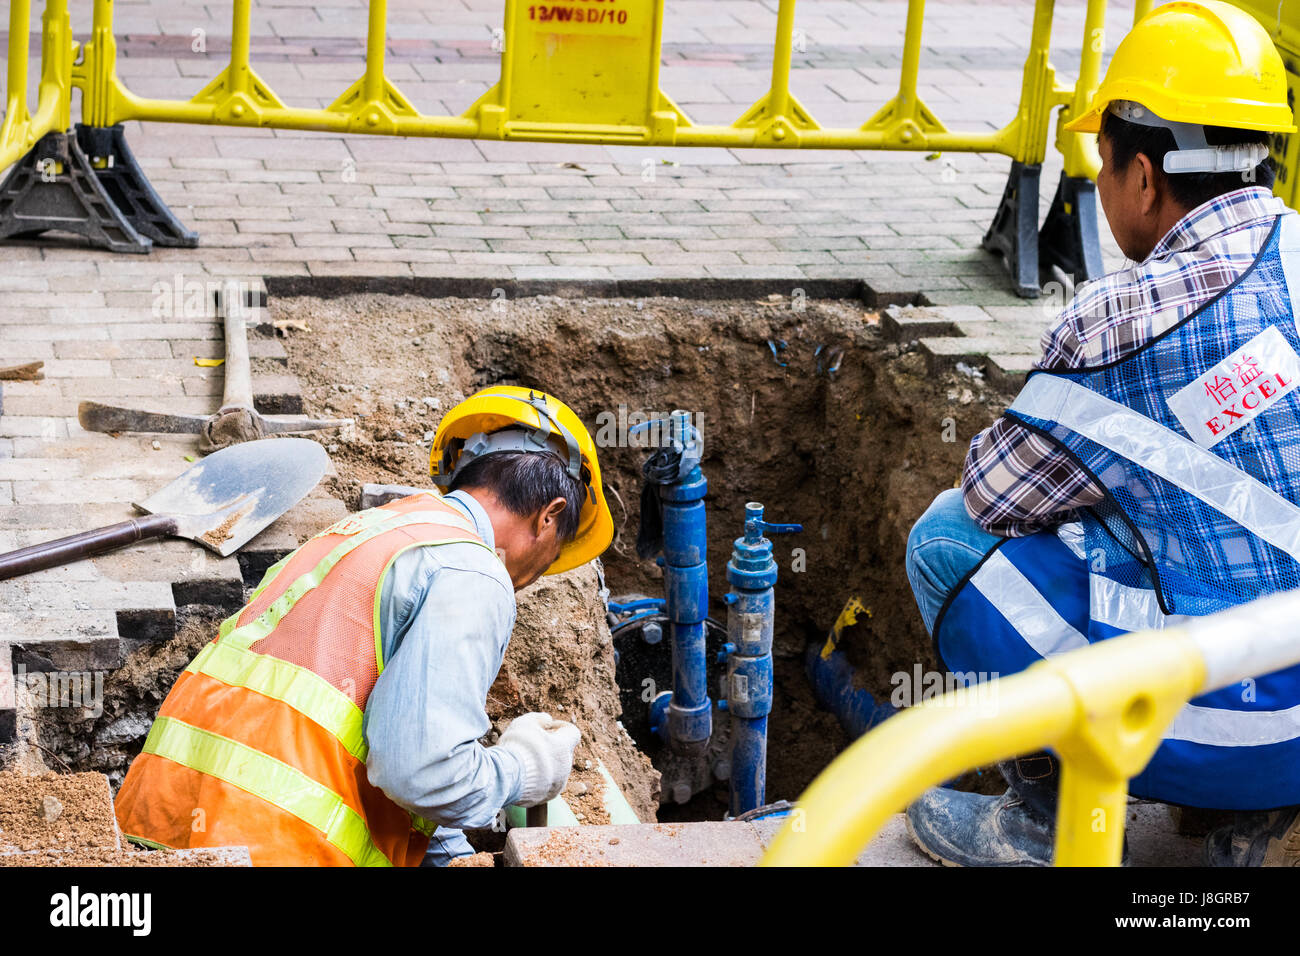 Workers digging a hole in sidewalk for repairs or maintenance Stock Photo